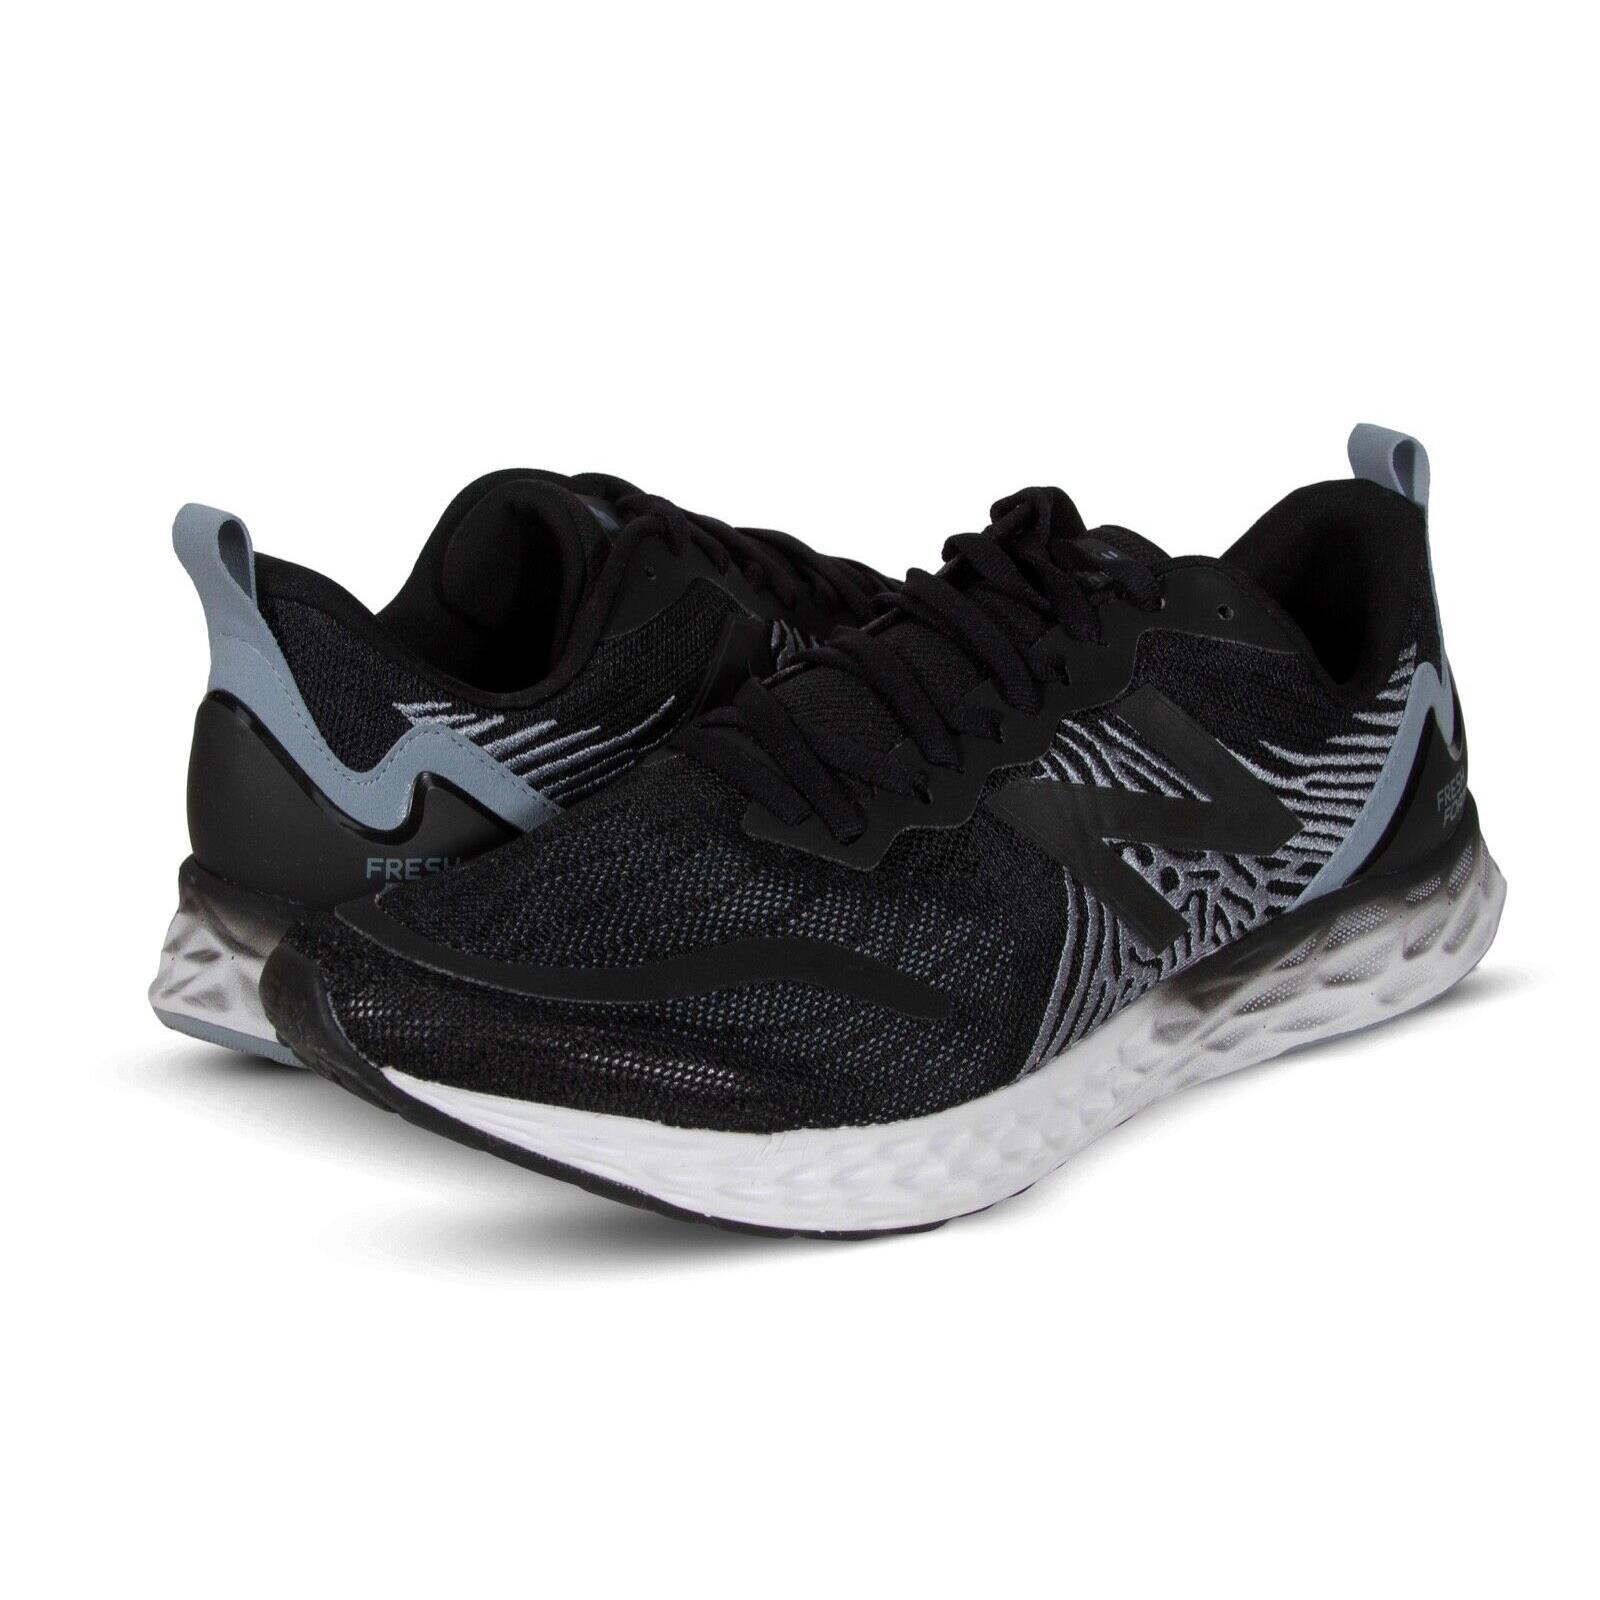 Balance Fresh Foam Tempo Men s Running Shoes in Black with Grey Mtmpobk